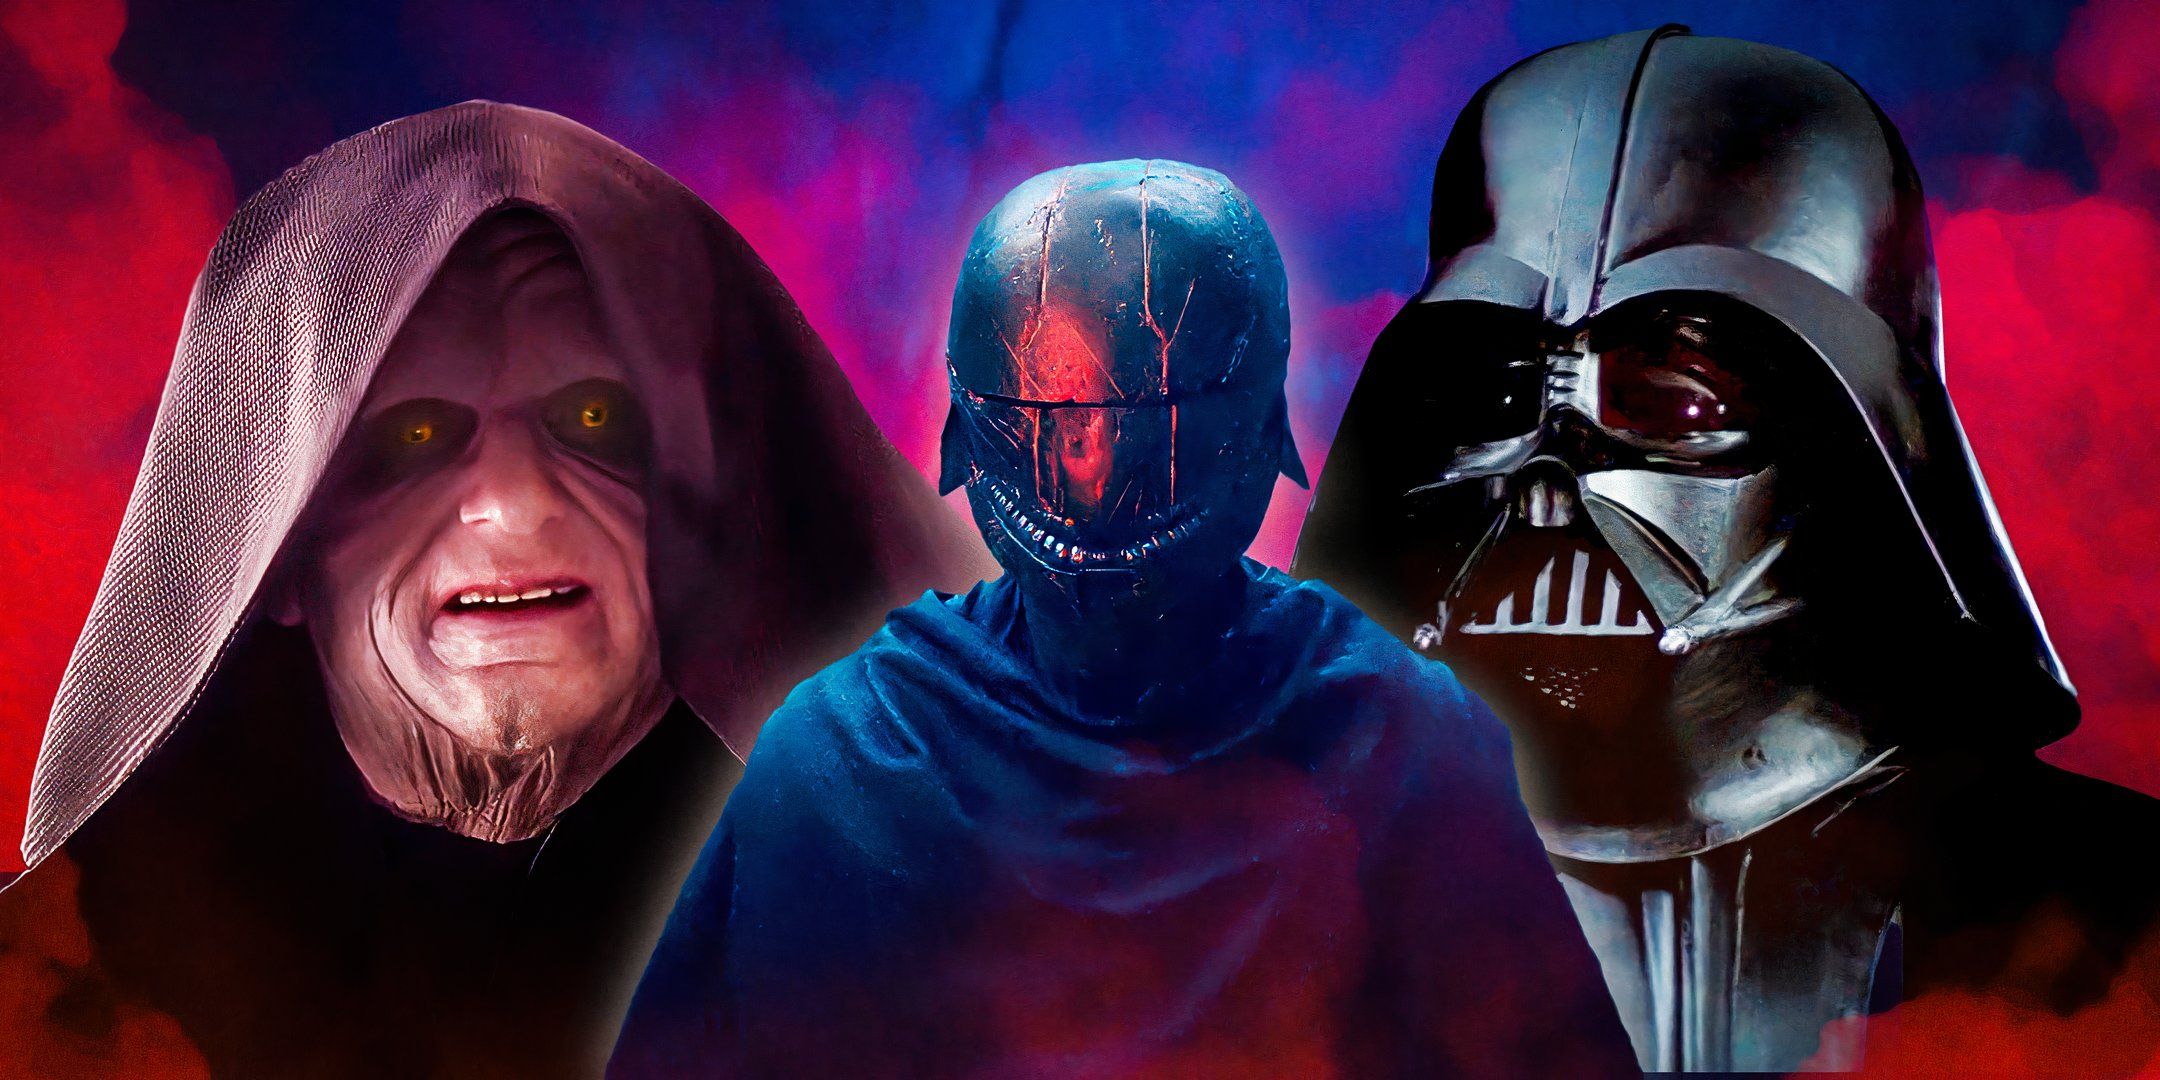 Palpatine, Darth Vader, and the Sith Acolyte